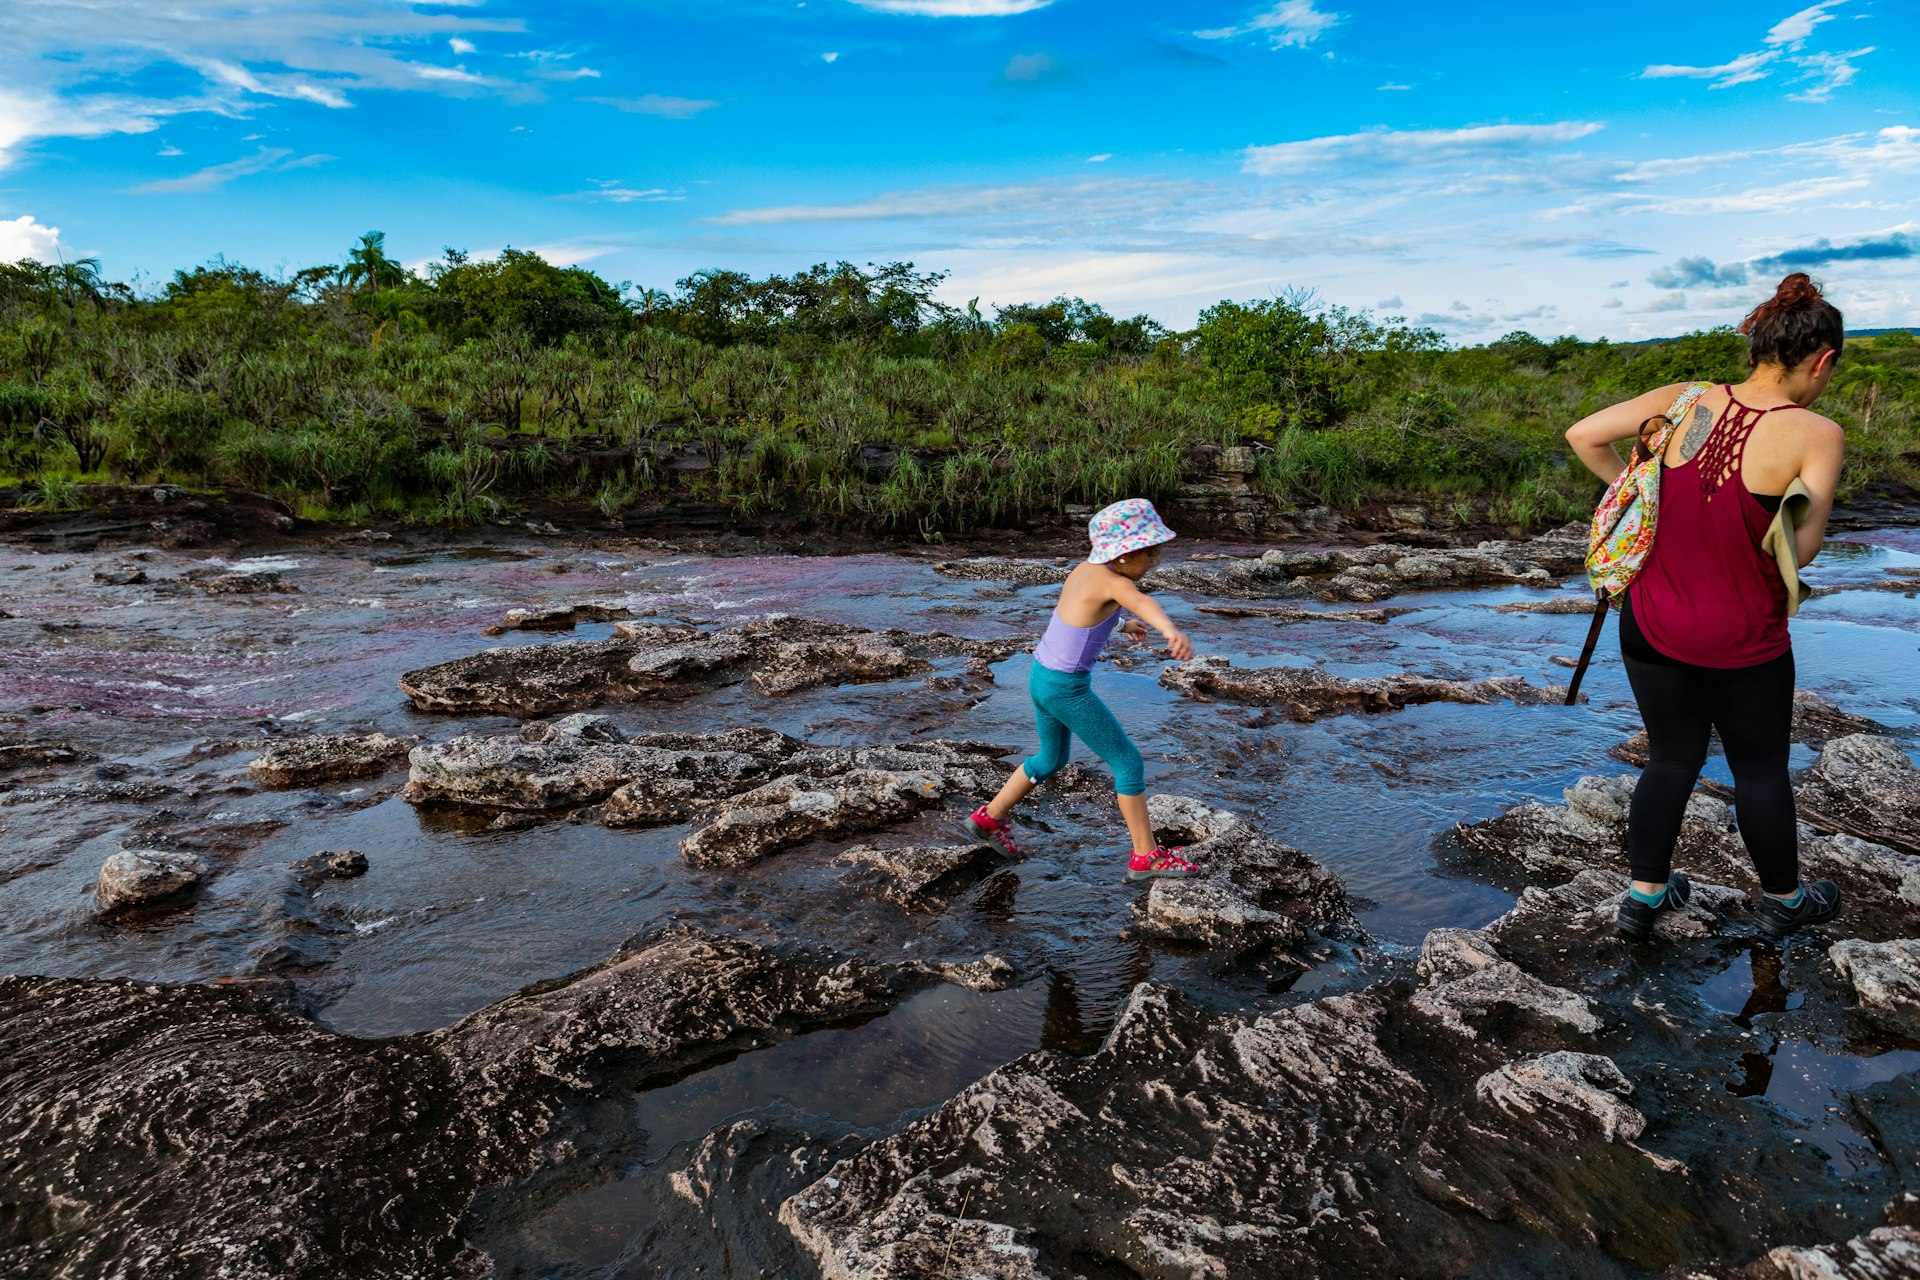 A little girl in blue leggings and a purple swim top hops between rocks on the Cano Cristales river next to a woman in a red tank top and black leggings